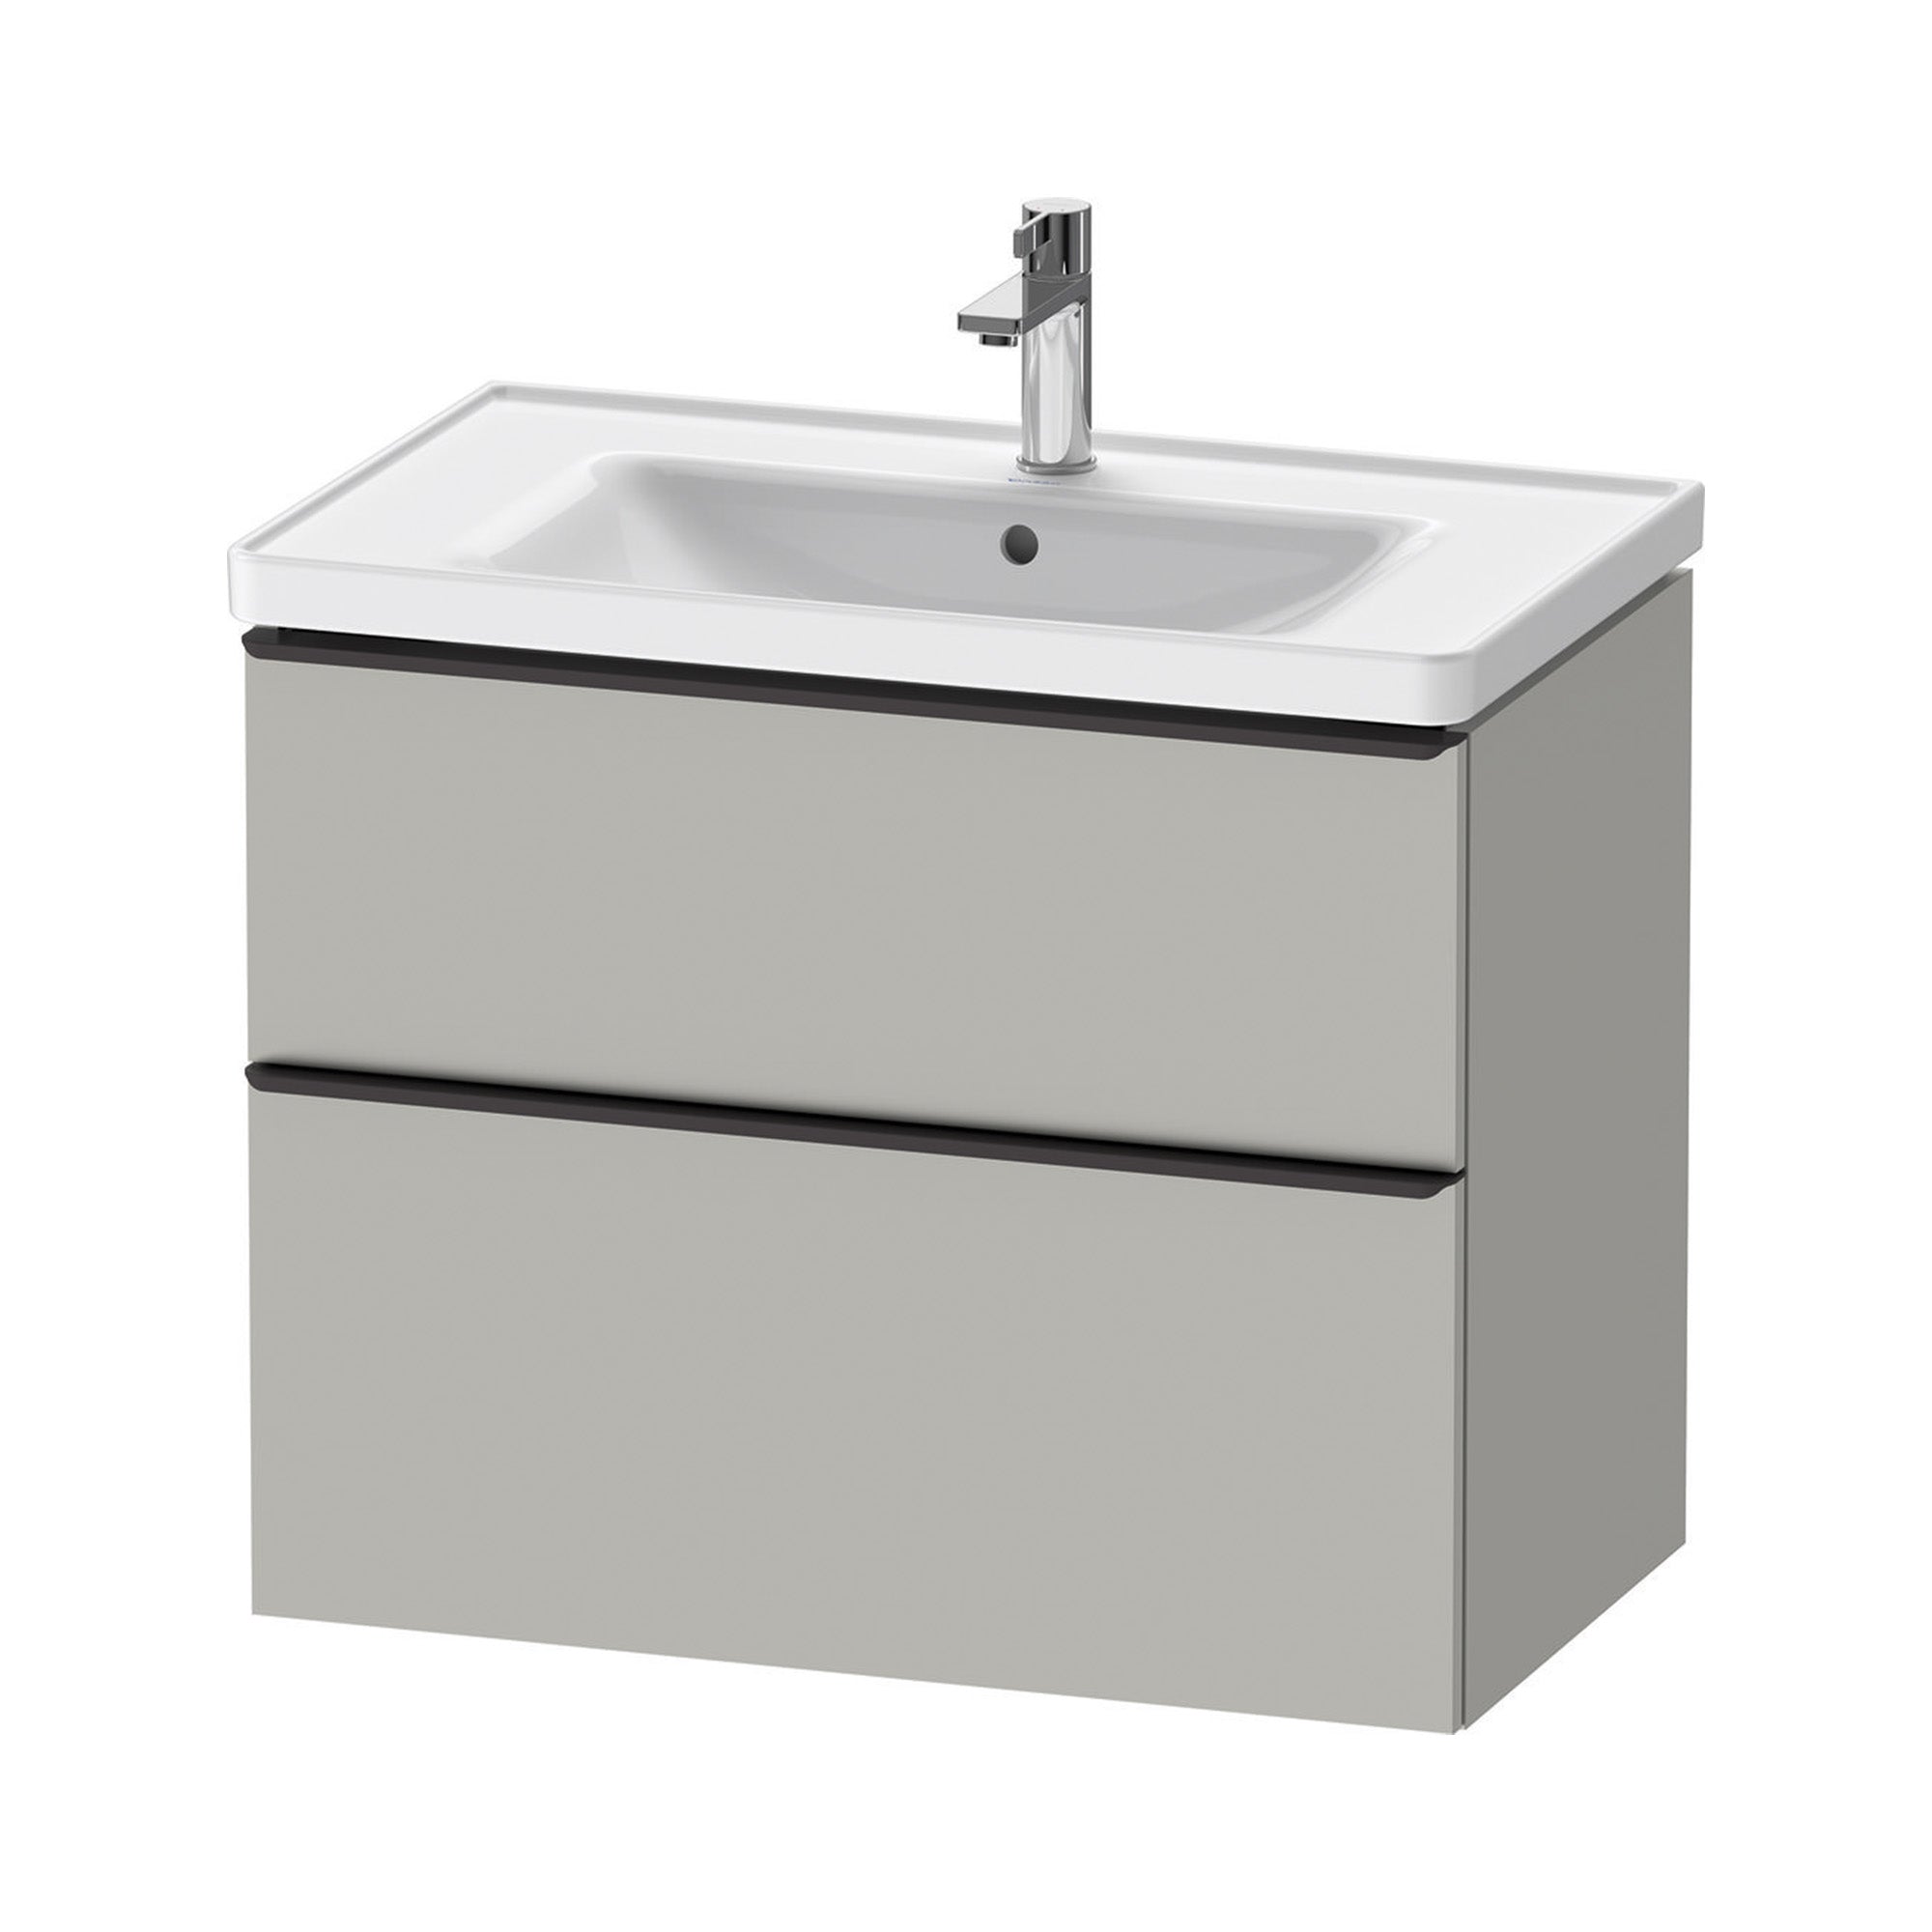 duravit d-neo 800mm wall mounted vanity unit with d-neo basin concrete grey diamond black handles